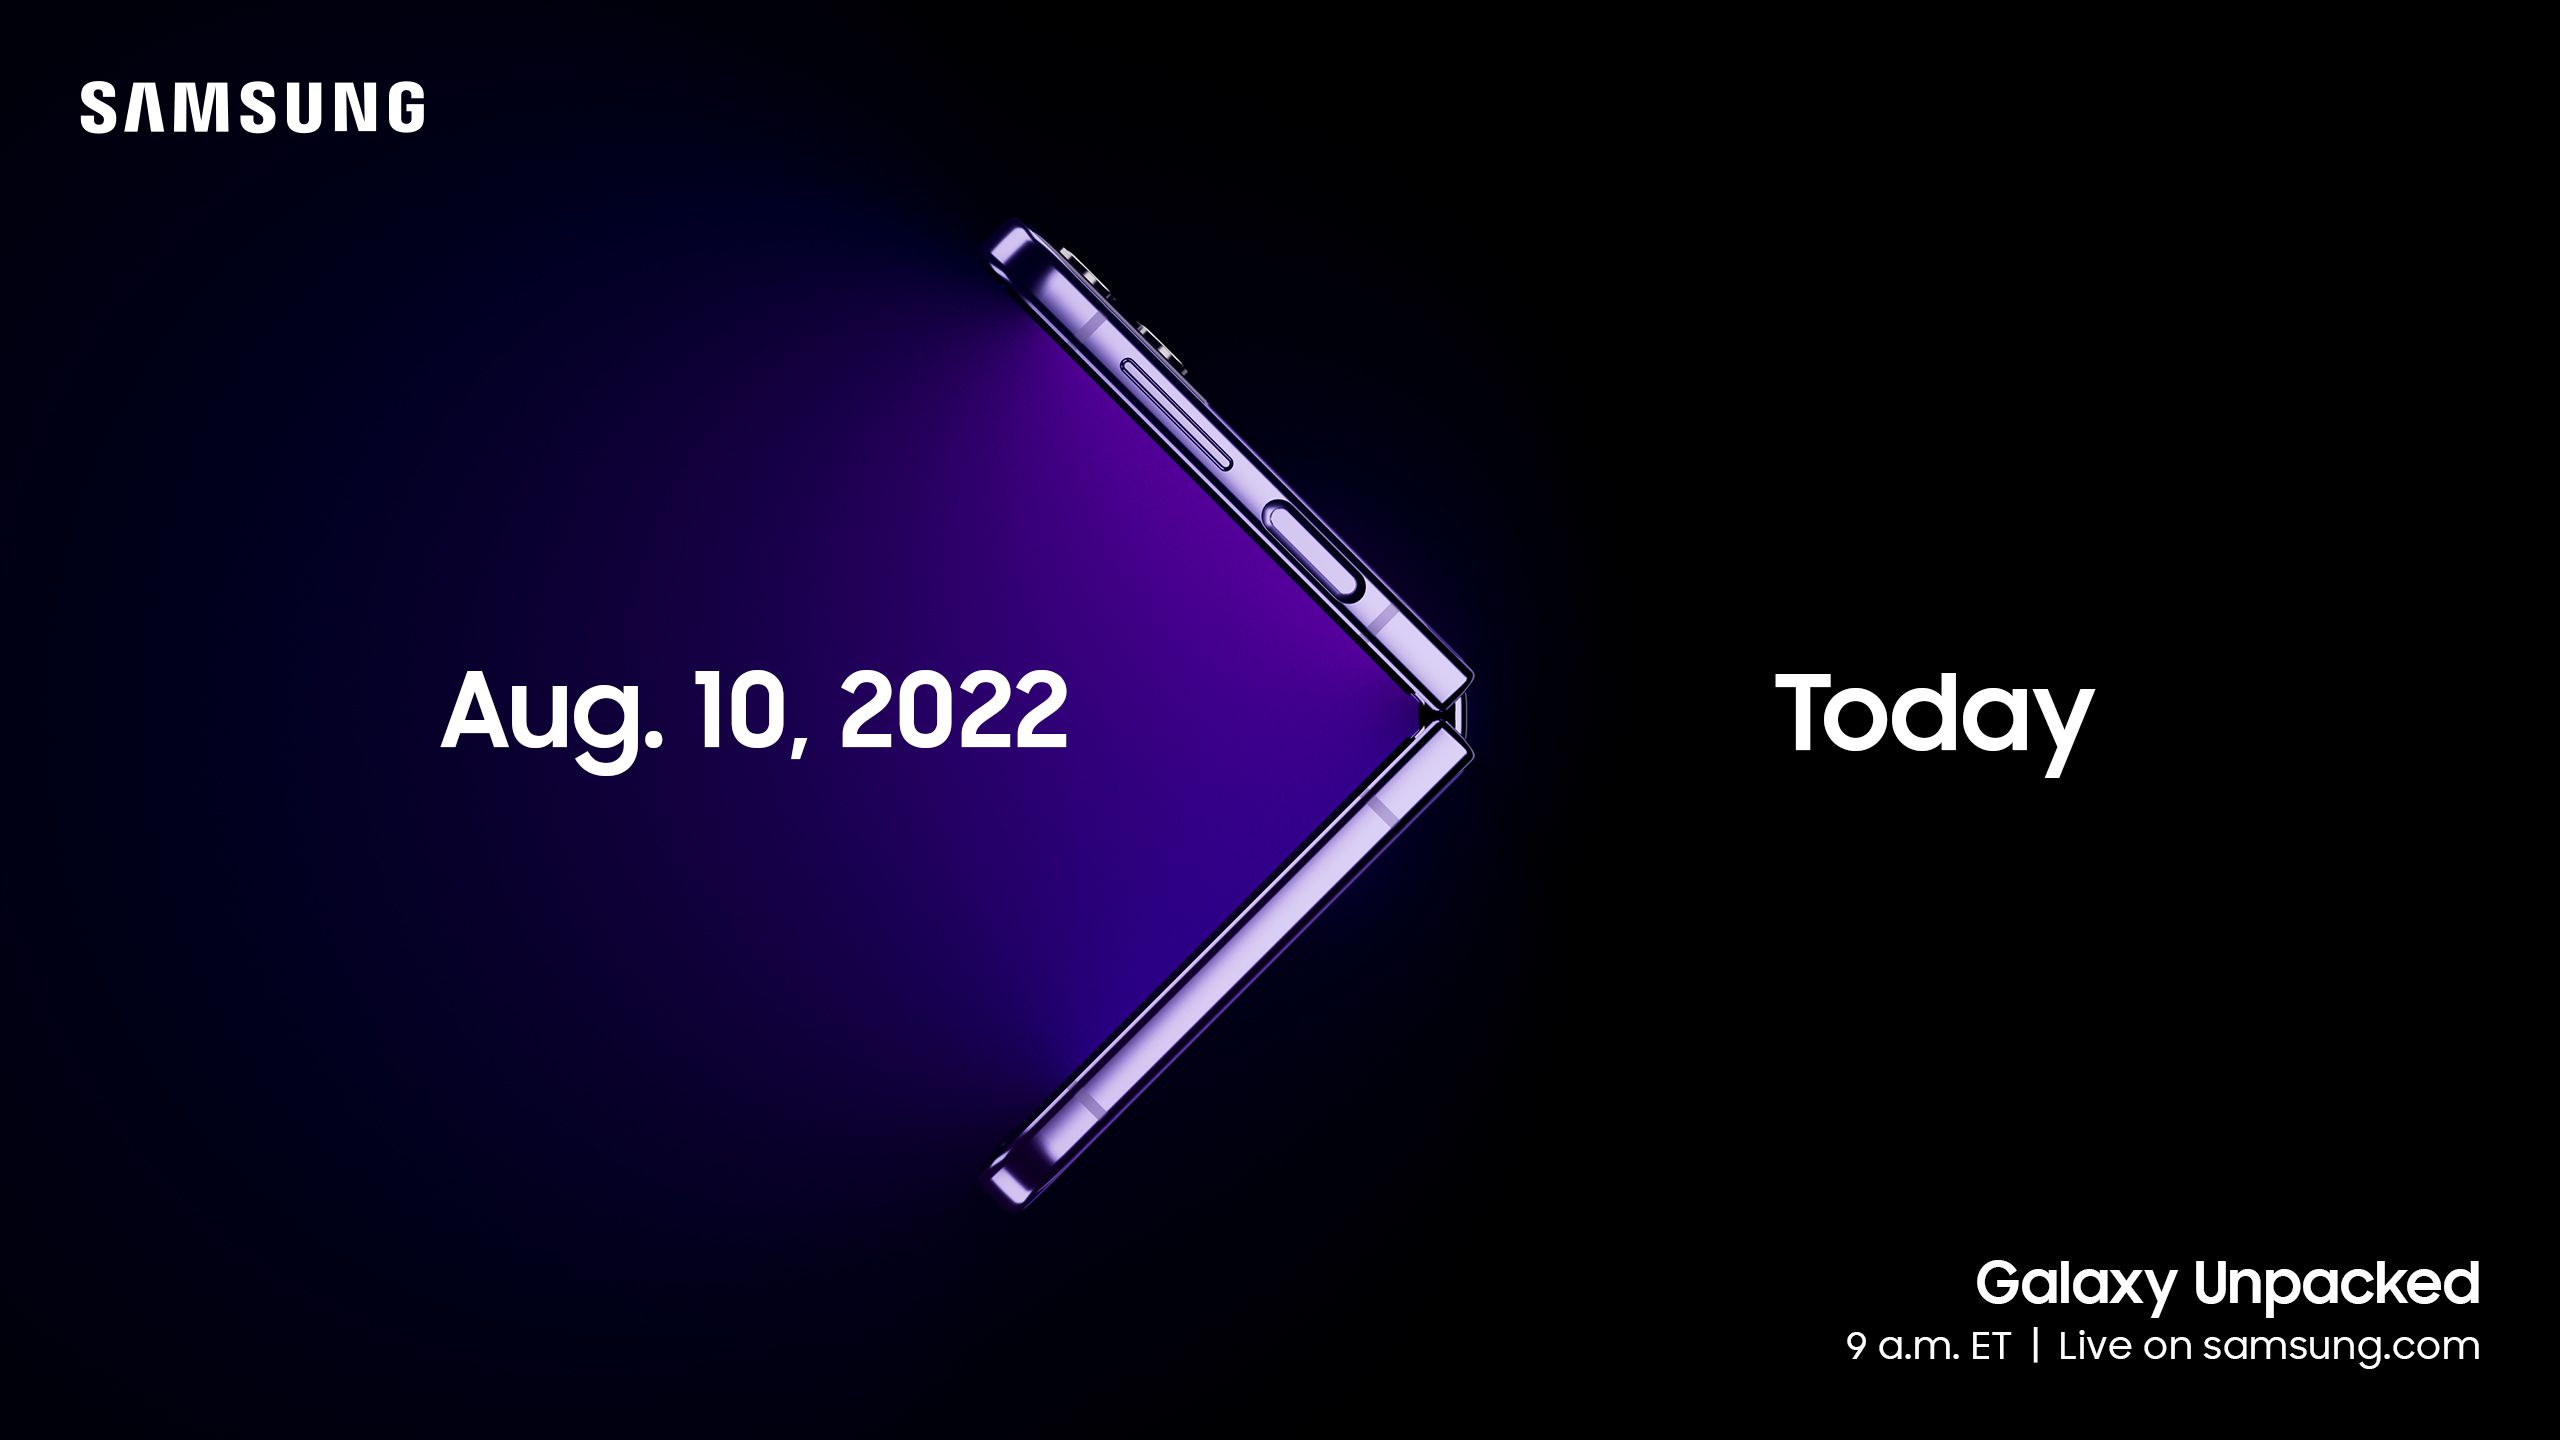 How to watch Samsung Galaxy Unpacked 2022